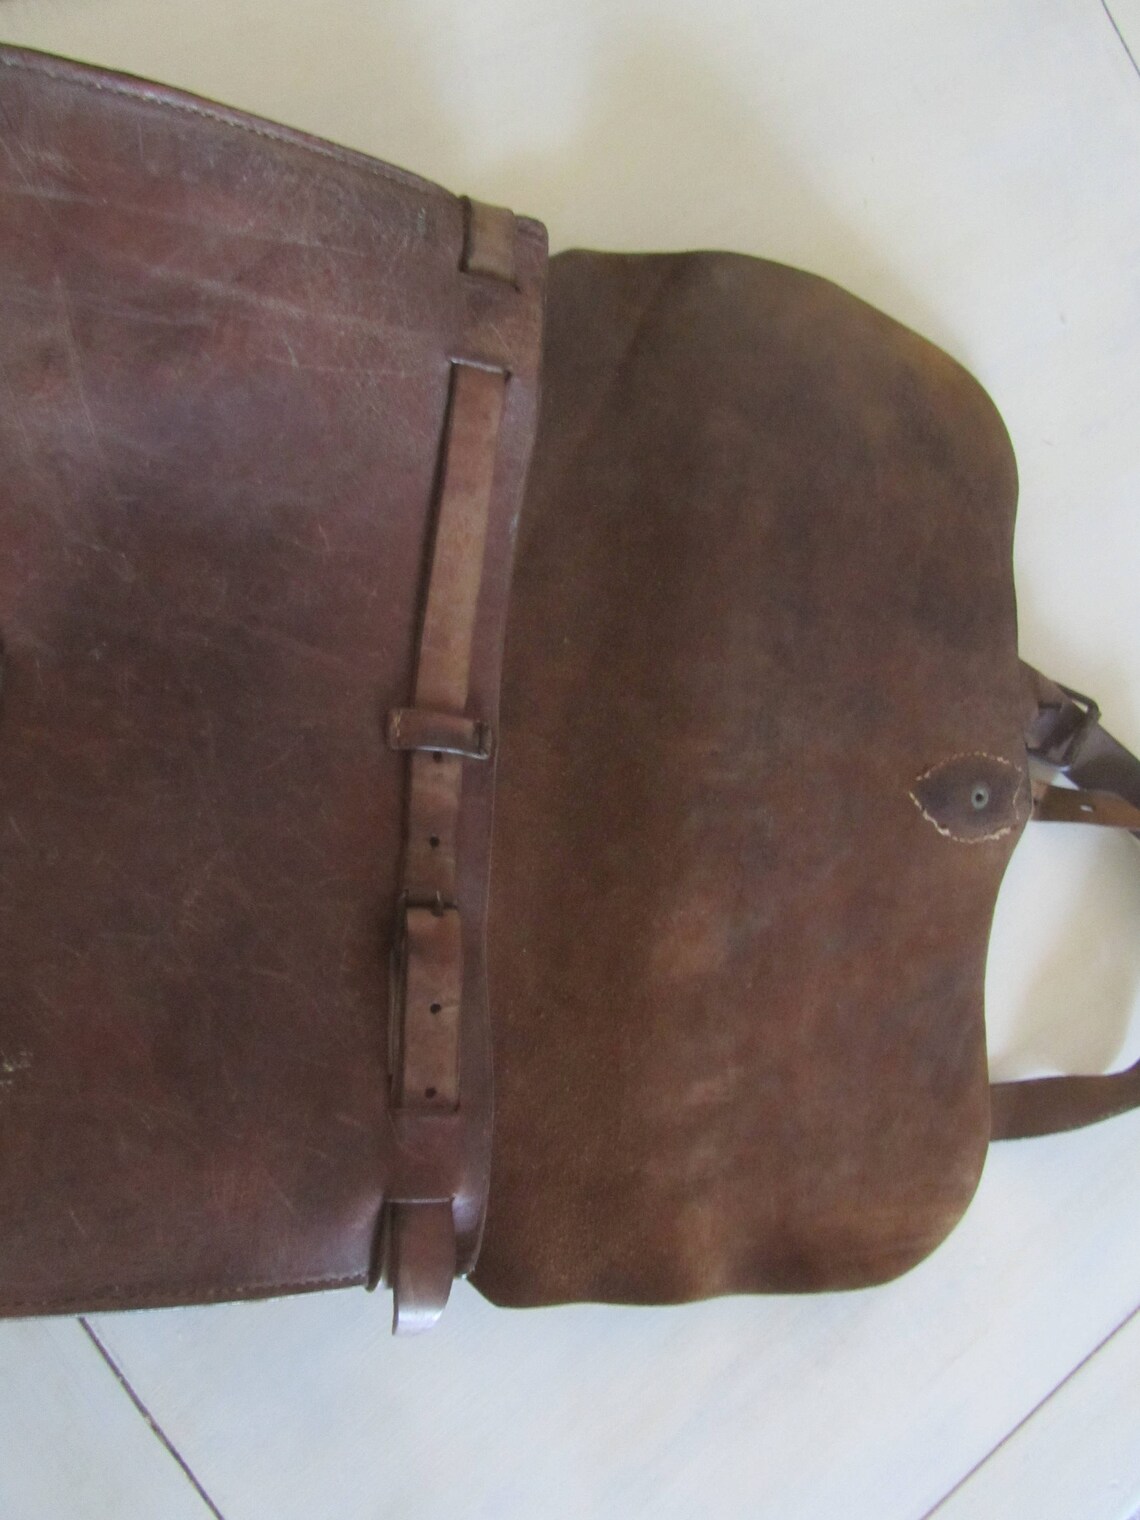 Vintage Leather Mail Bag Correos Spanish Mail Bag Leather - Etsy